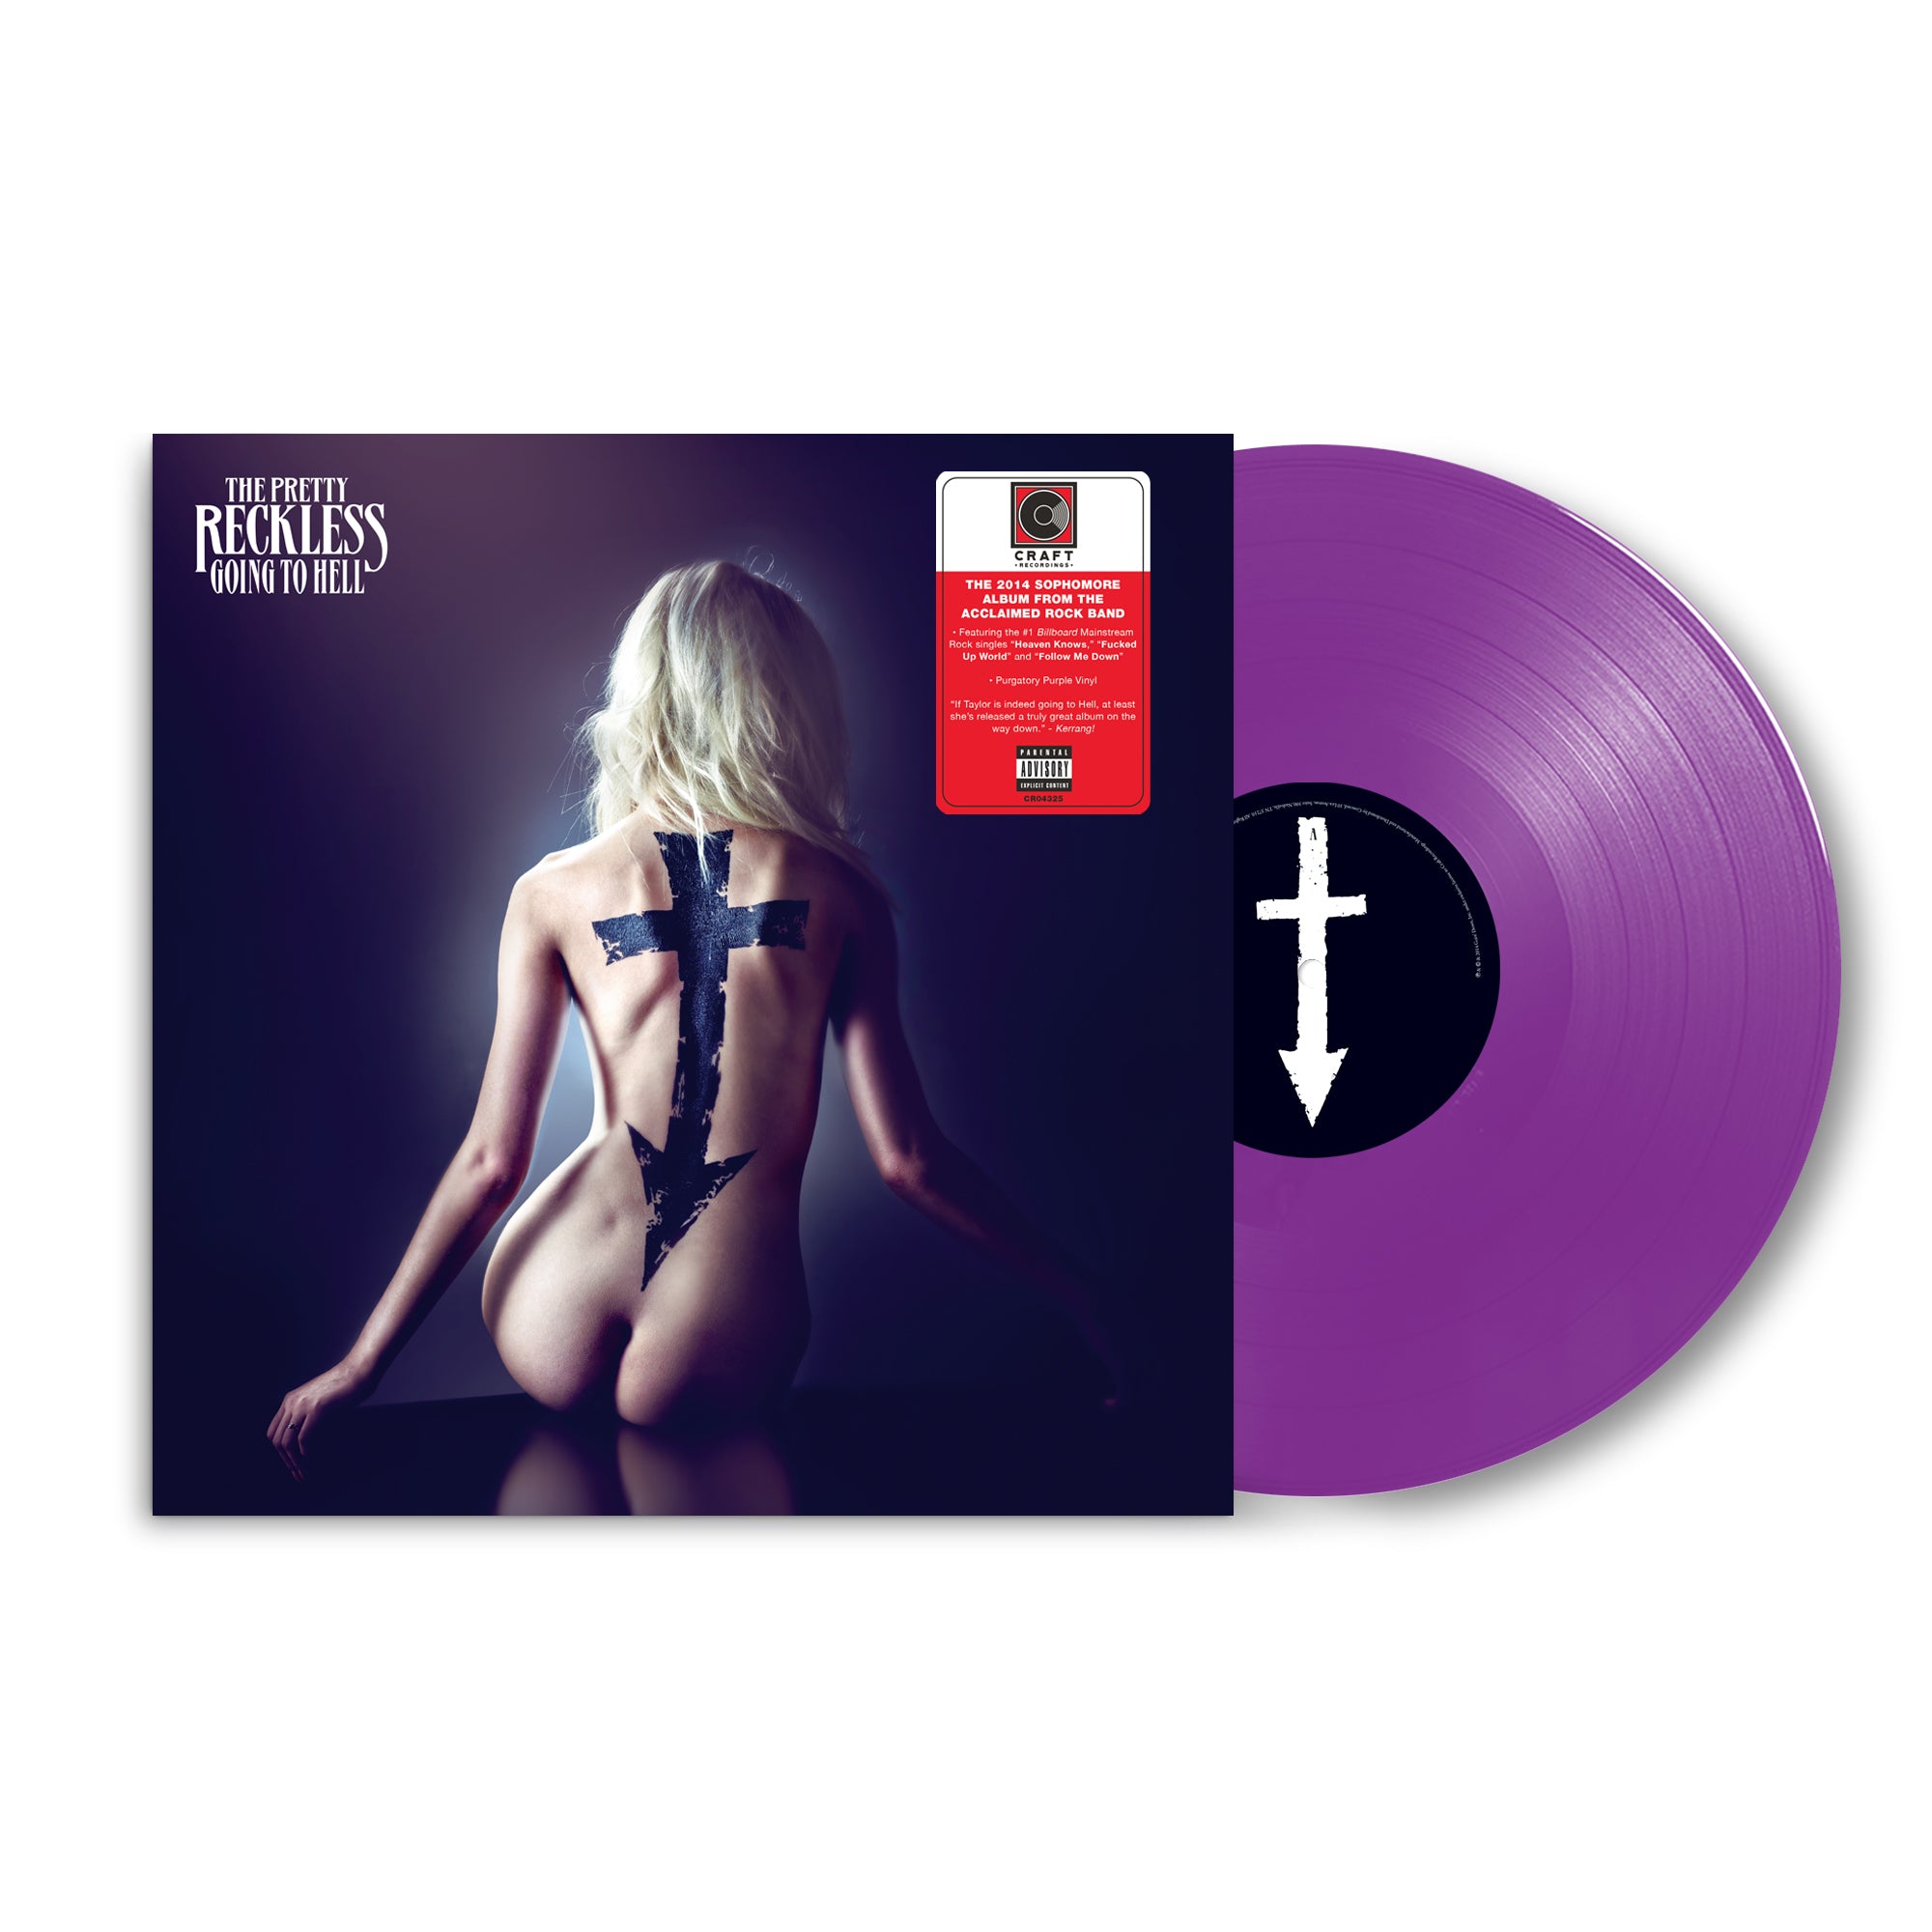 Buy The Pretty Reckless - Going To Hell (Indie Exclusive Purple Vinyl)